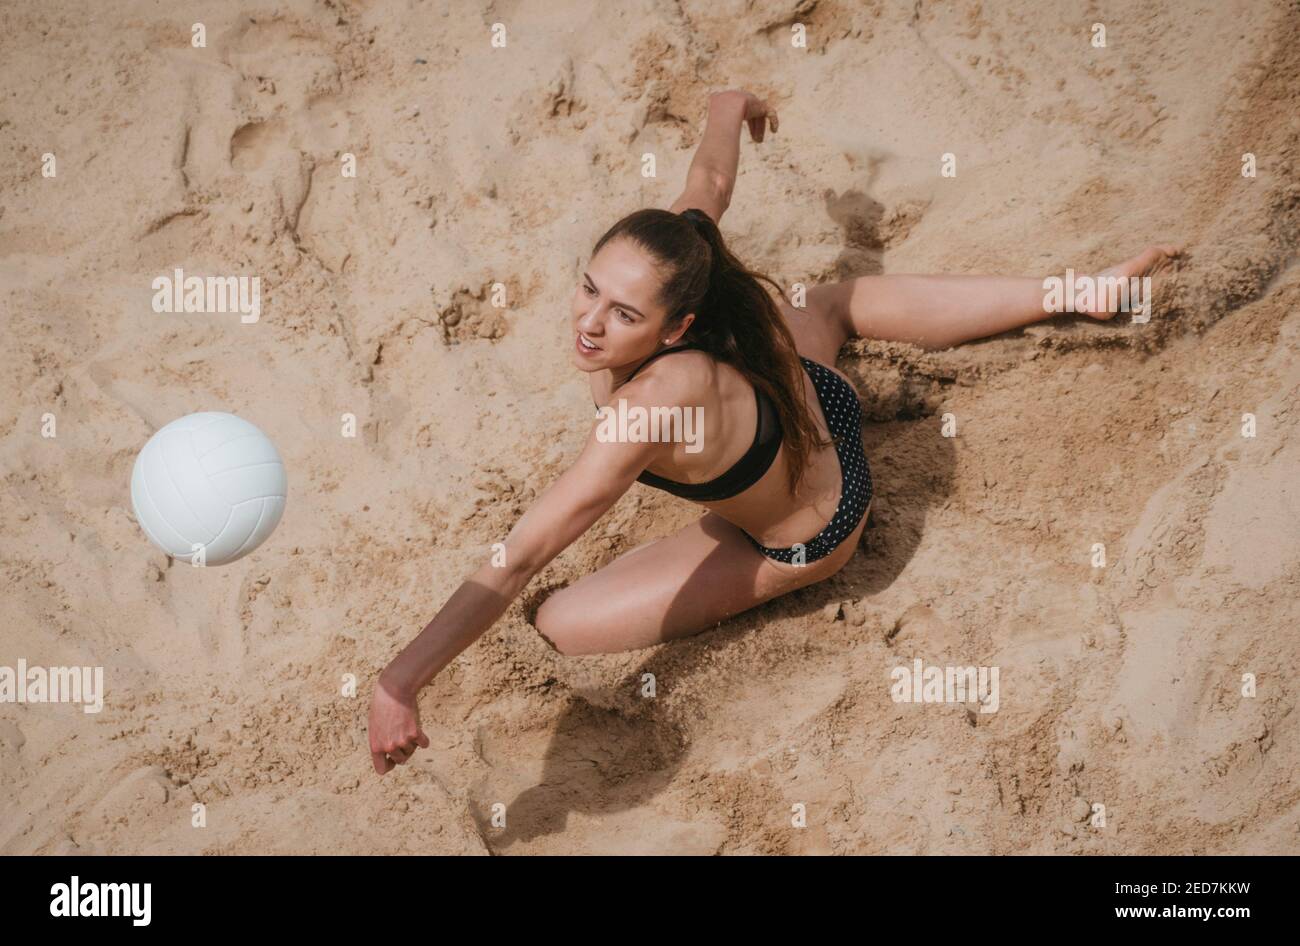 Professional player with white ball playing beach volleyball on sand. Summer vacation and sport concept Stock Photo